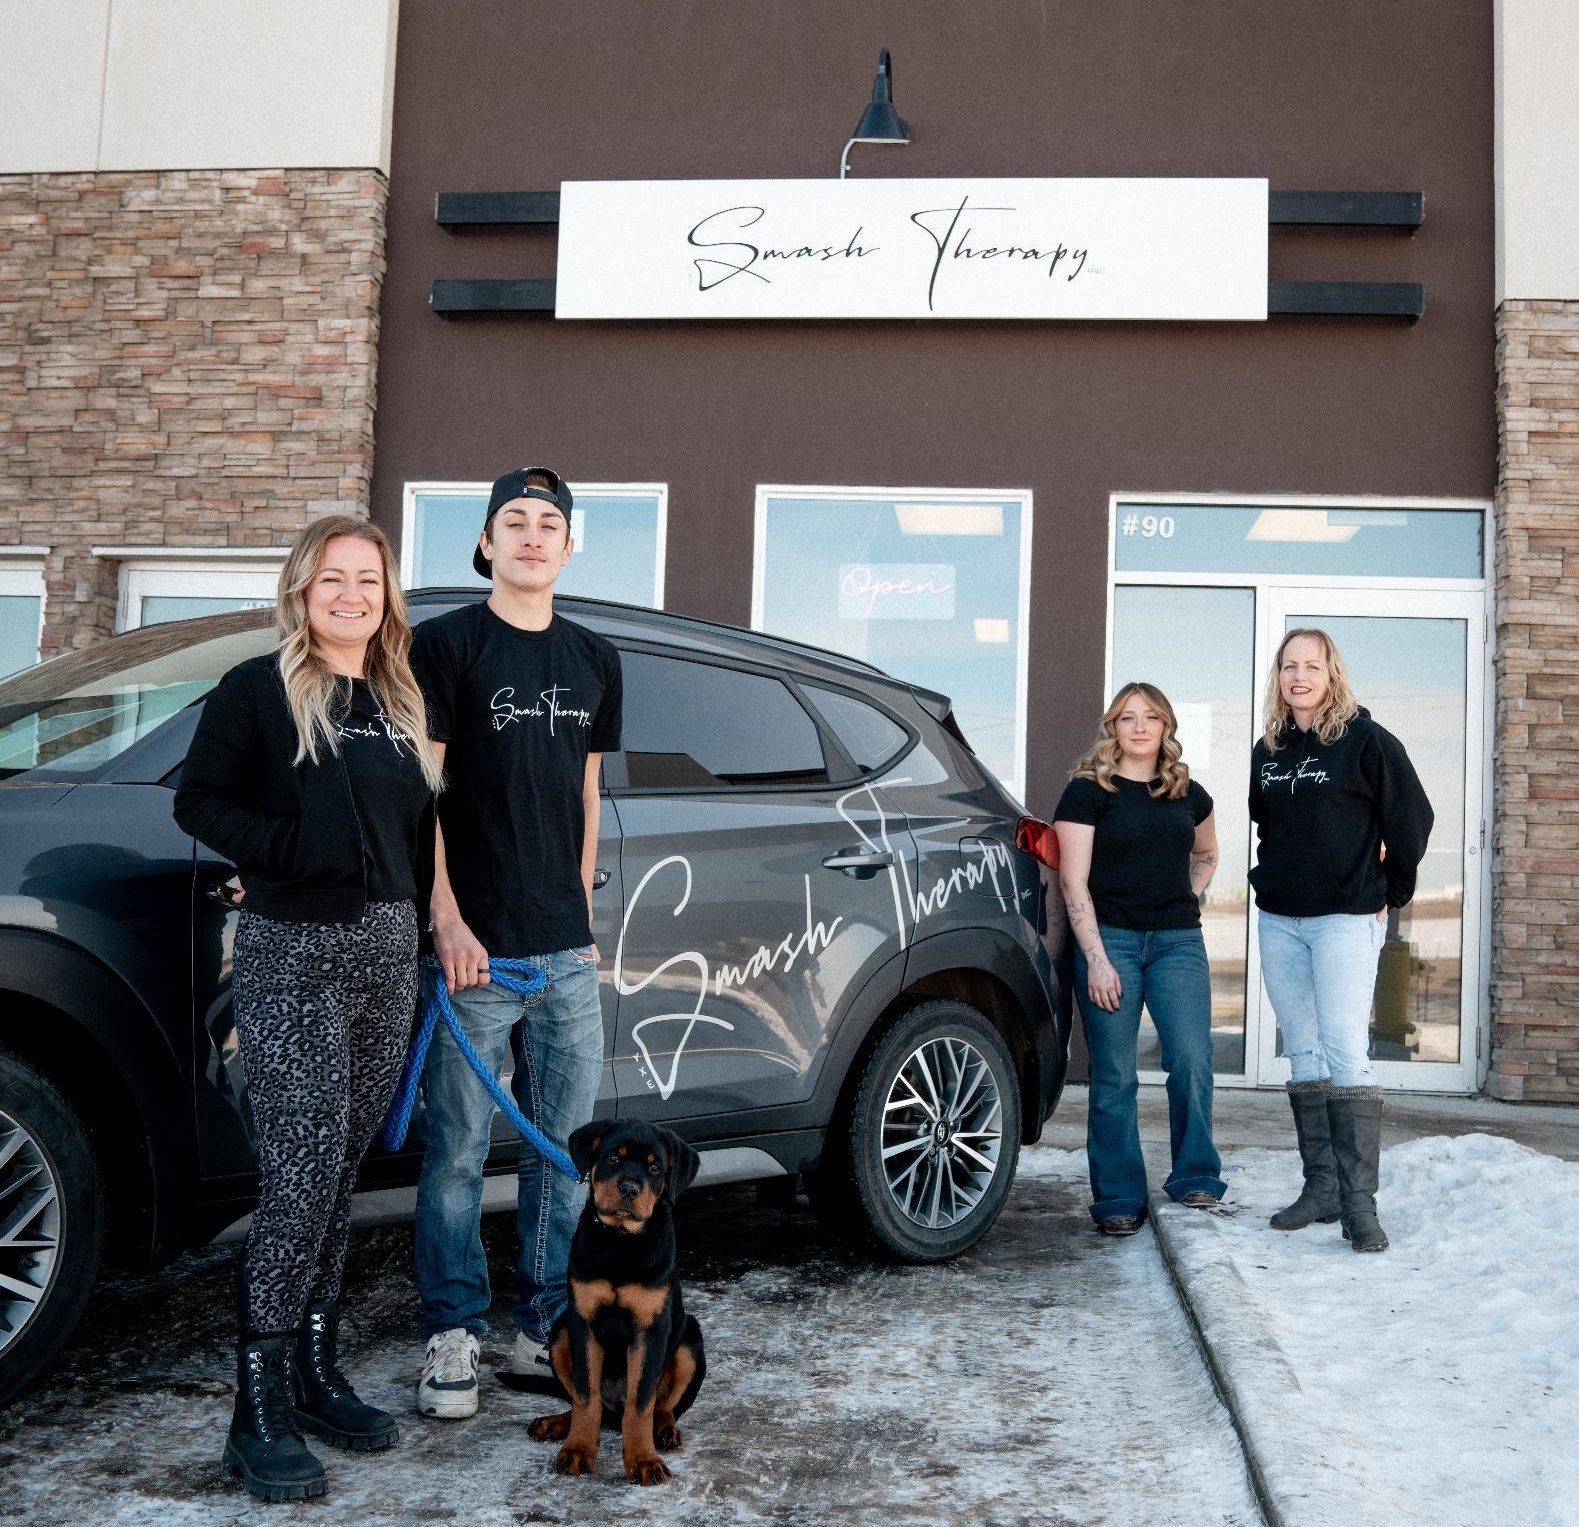 Smash Therapy team in front of building and branded vehicle